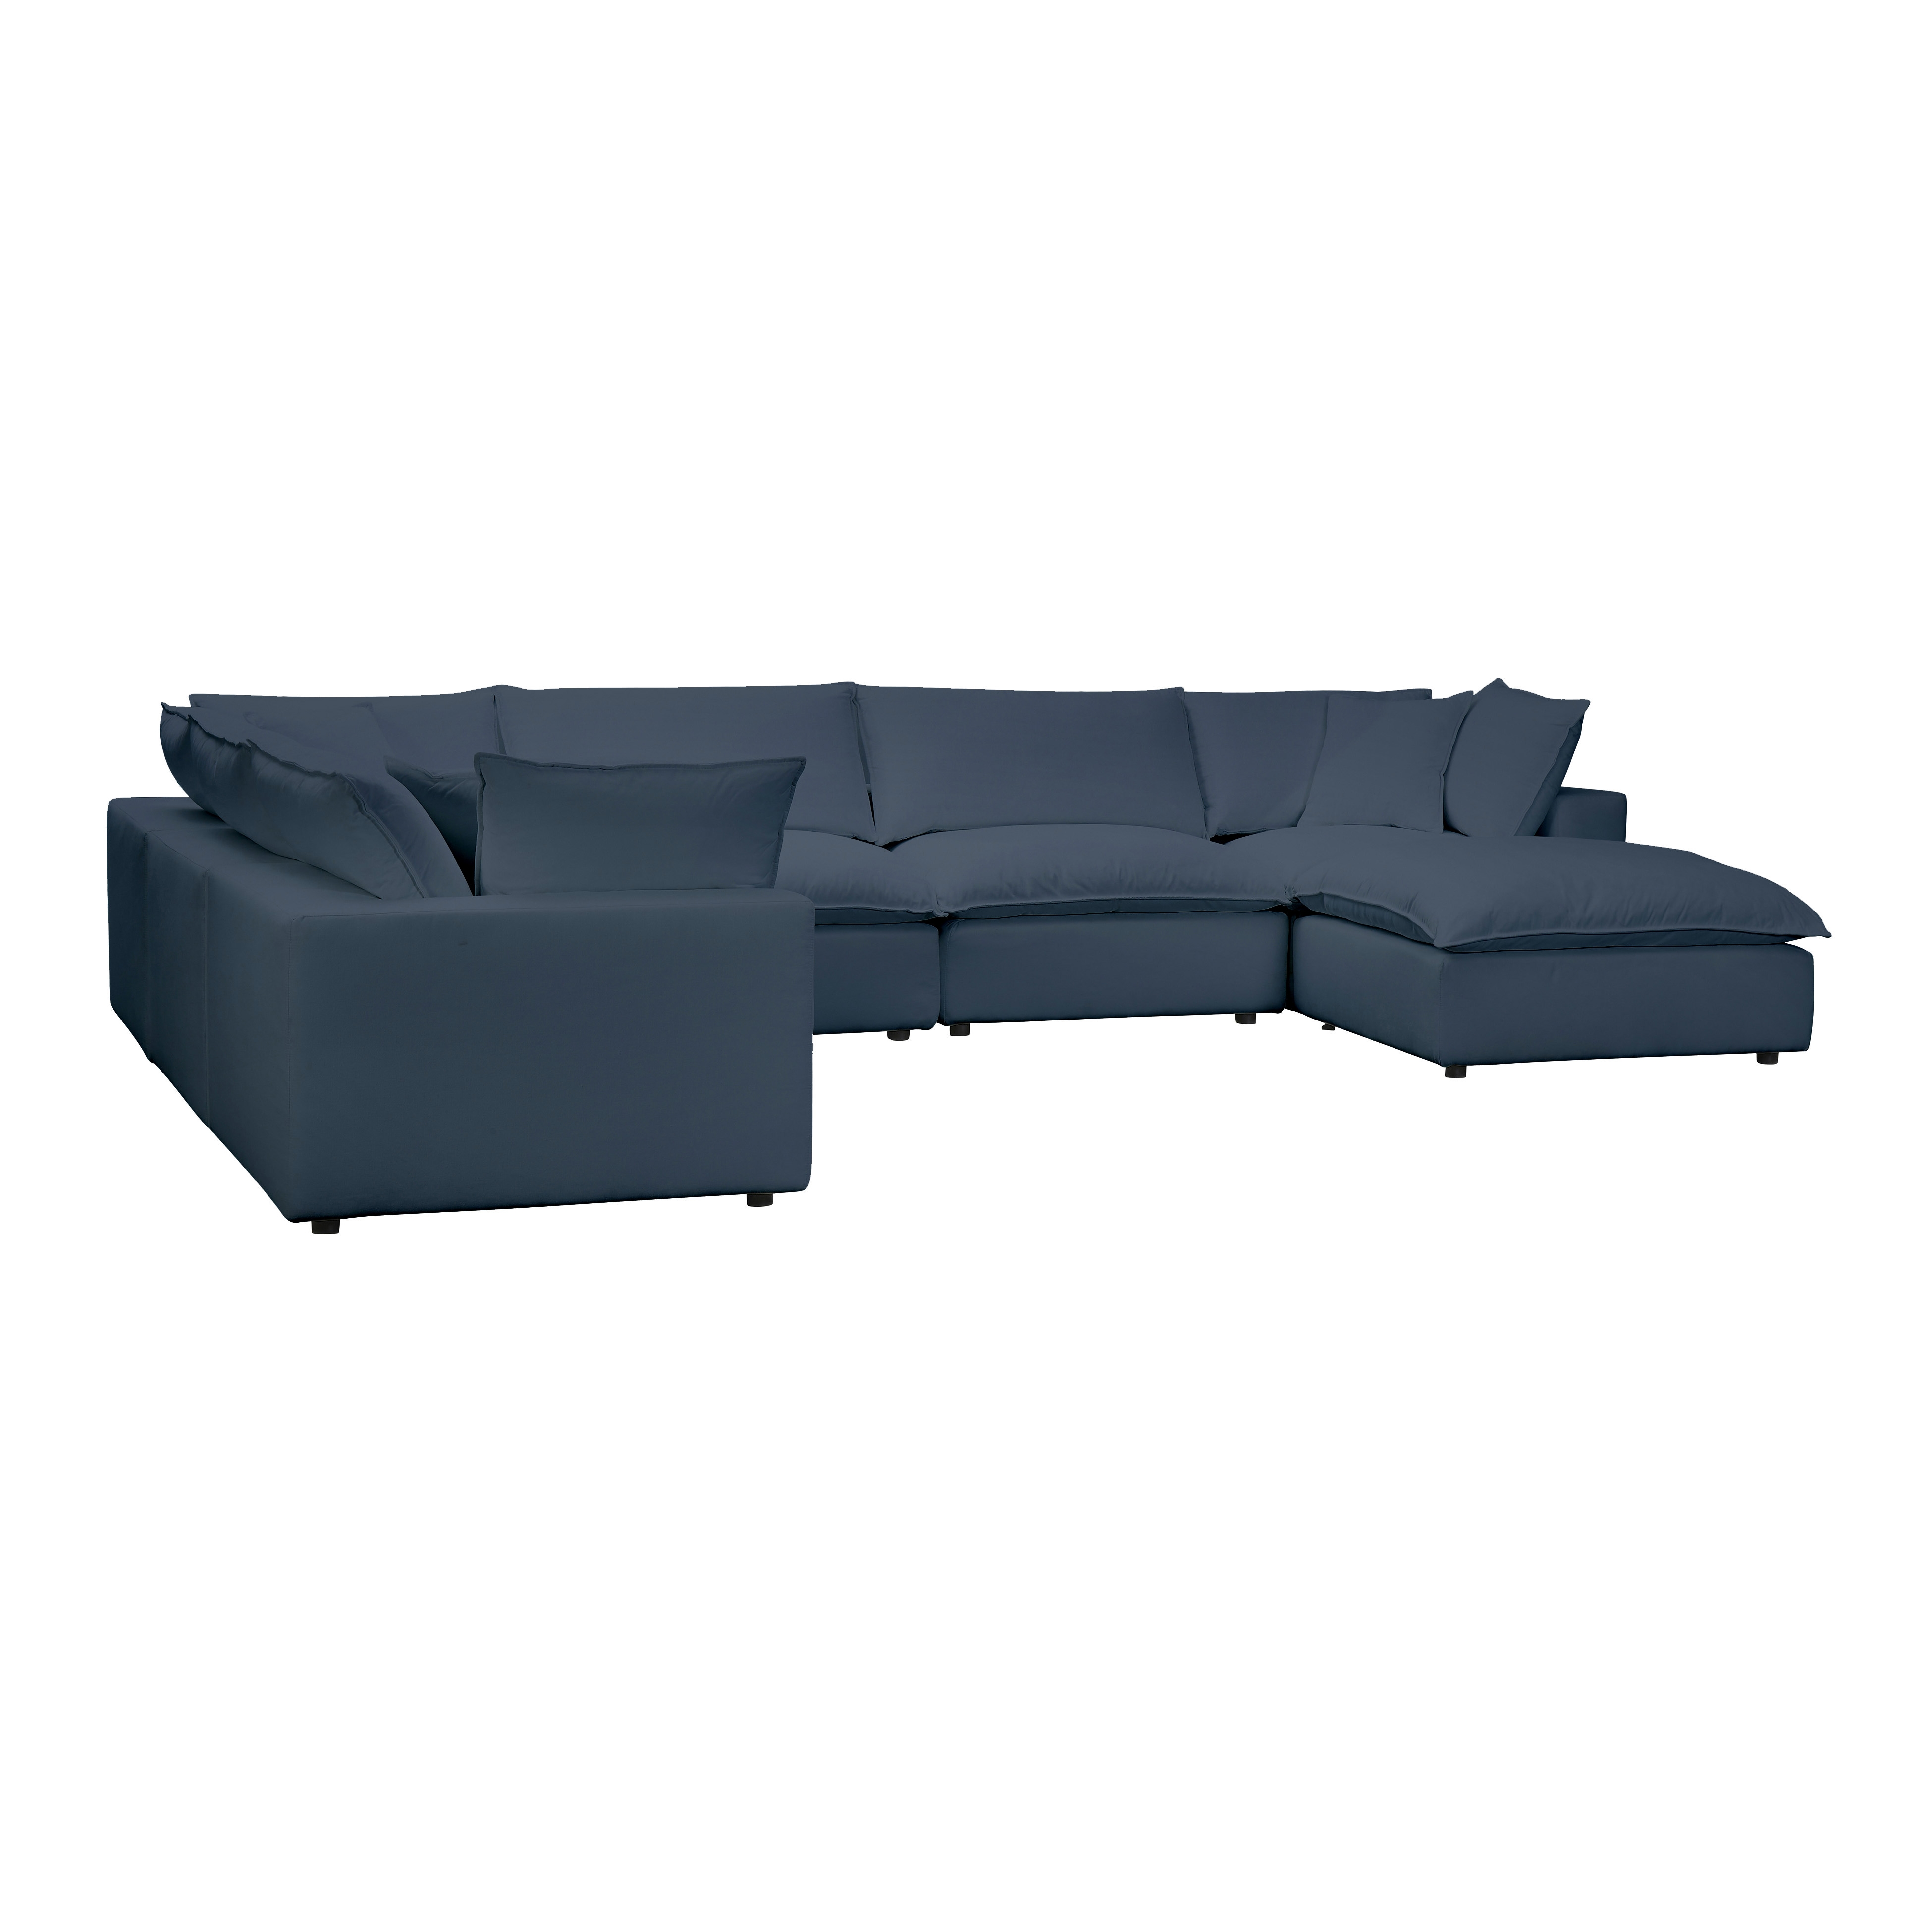 Cali Navy Modular Large Chaise Sectional - Image 2